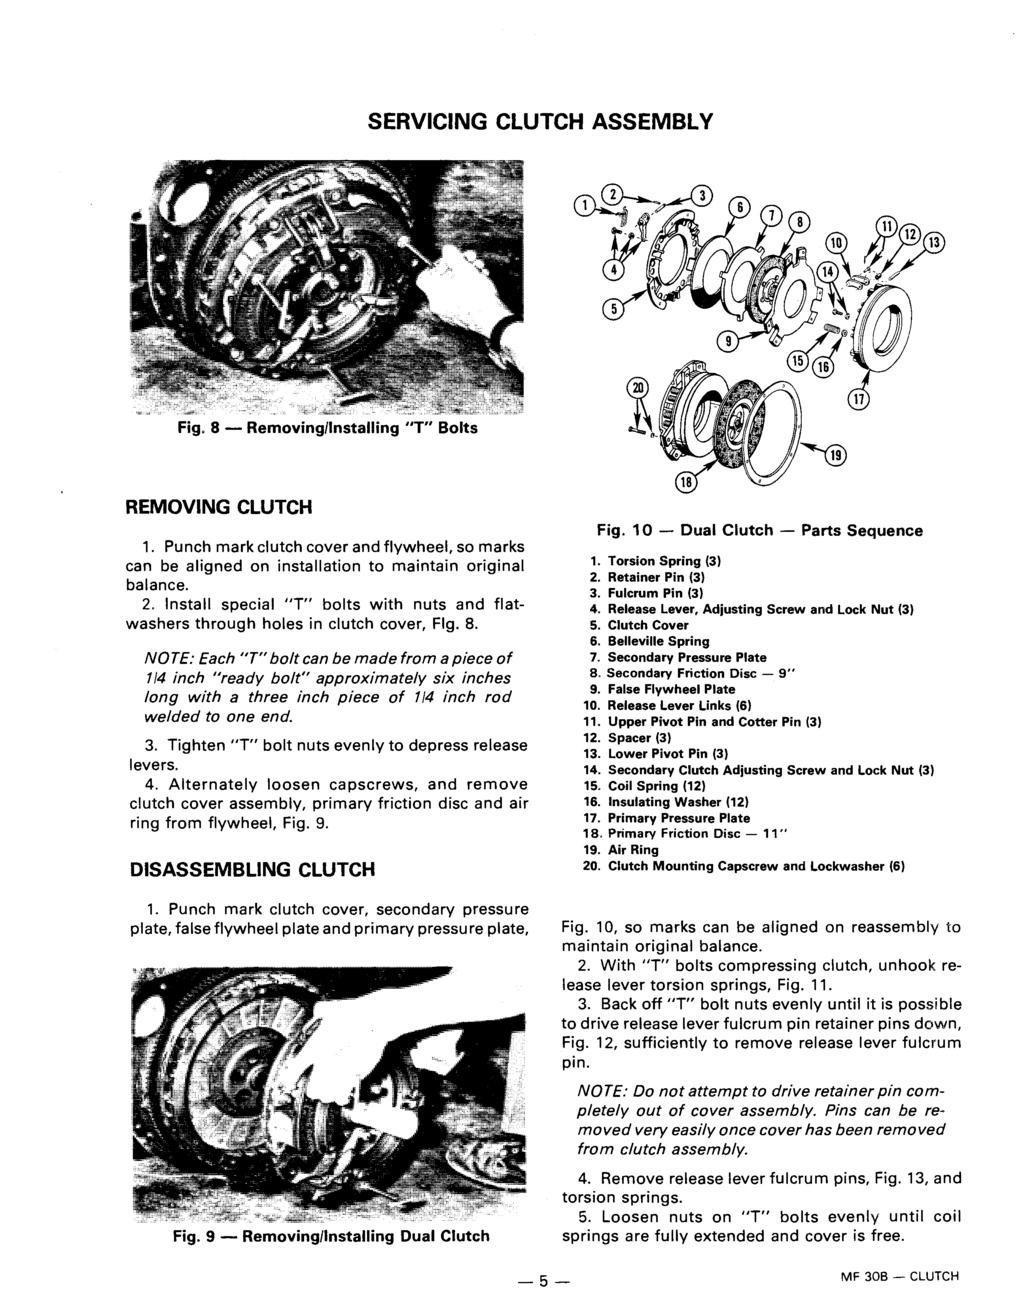 SERVICING CLUTCH ASSEMBLY Fig. 8 - Removing/Installing "T" Bolts REMOVING CLUTCH 1. Punch mark clutch cover and flywheel, so marks can be aligned on installation to maintain original balance. 2.